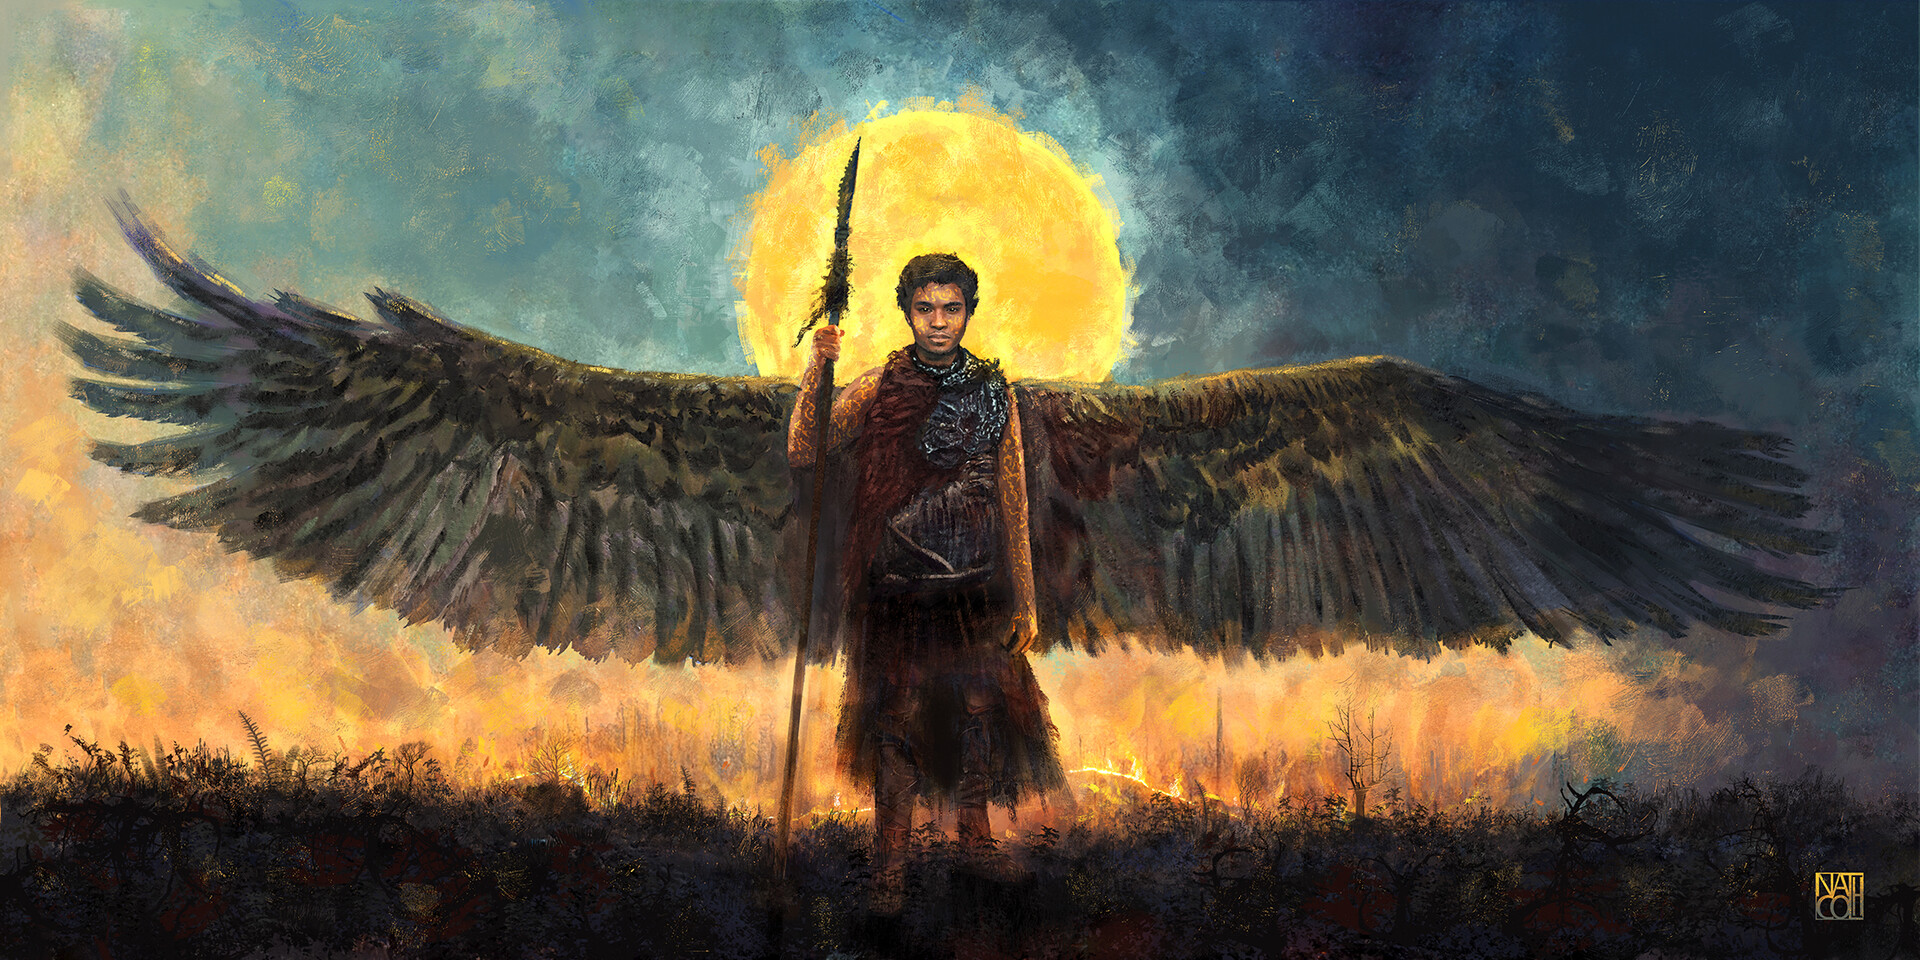 https://cdna.artstation.com/p/assets/images/images/053/832/696/large/nathan-colot-nathan-an-angel-with-leather-armor-3-pf.jpg?1663137472